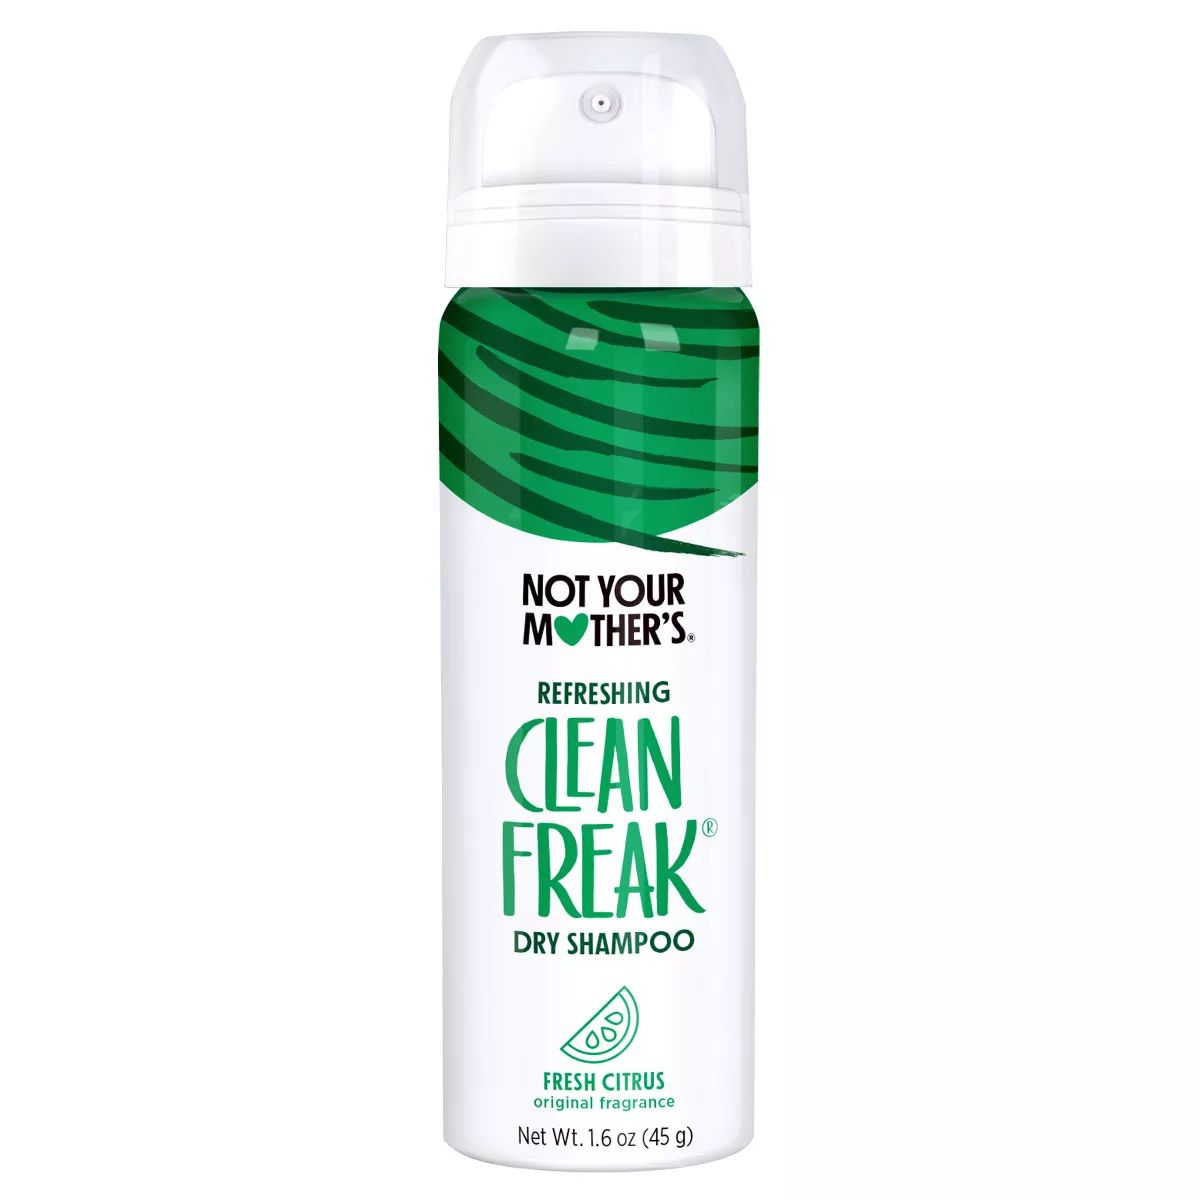 Not Your Mother's Clean Freak Refreshing Dry Shampoo-Travel Size - 1.6oz | Target